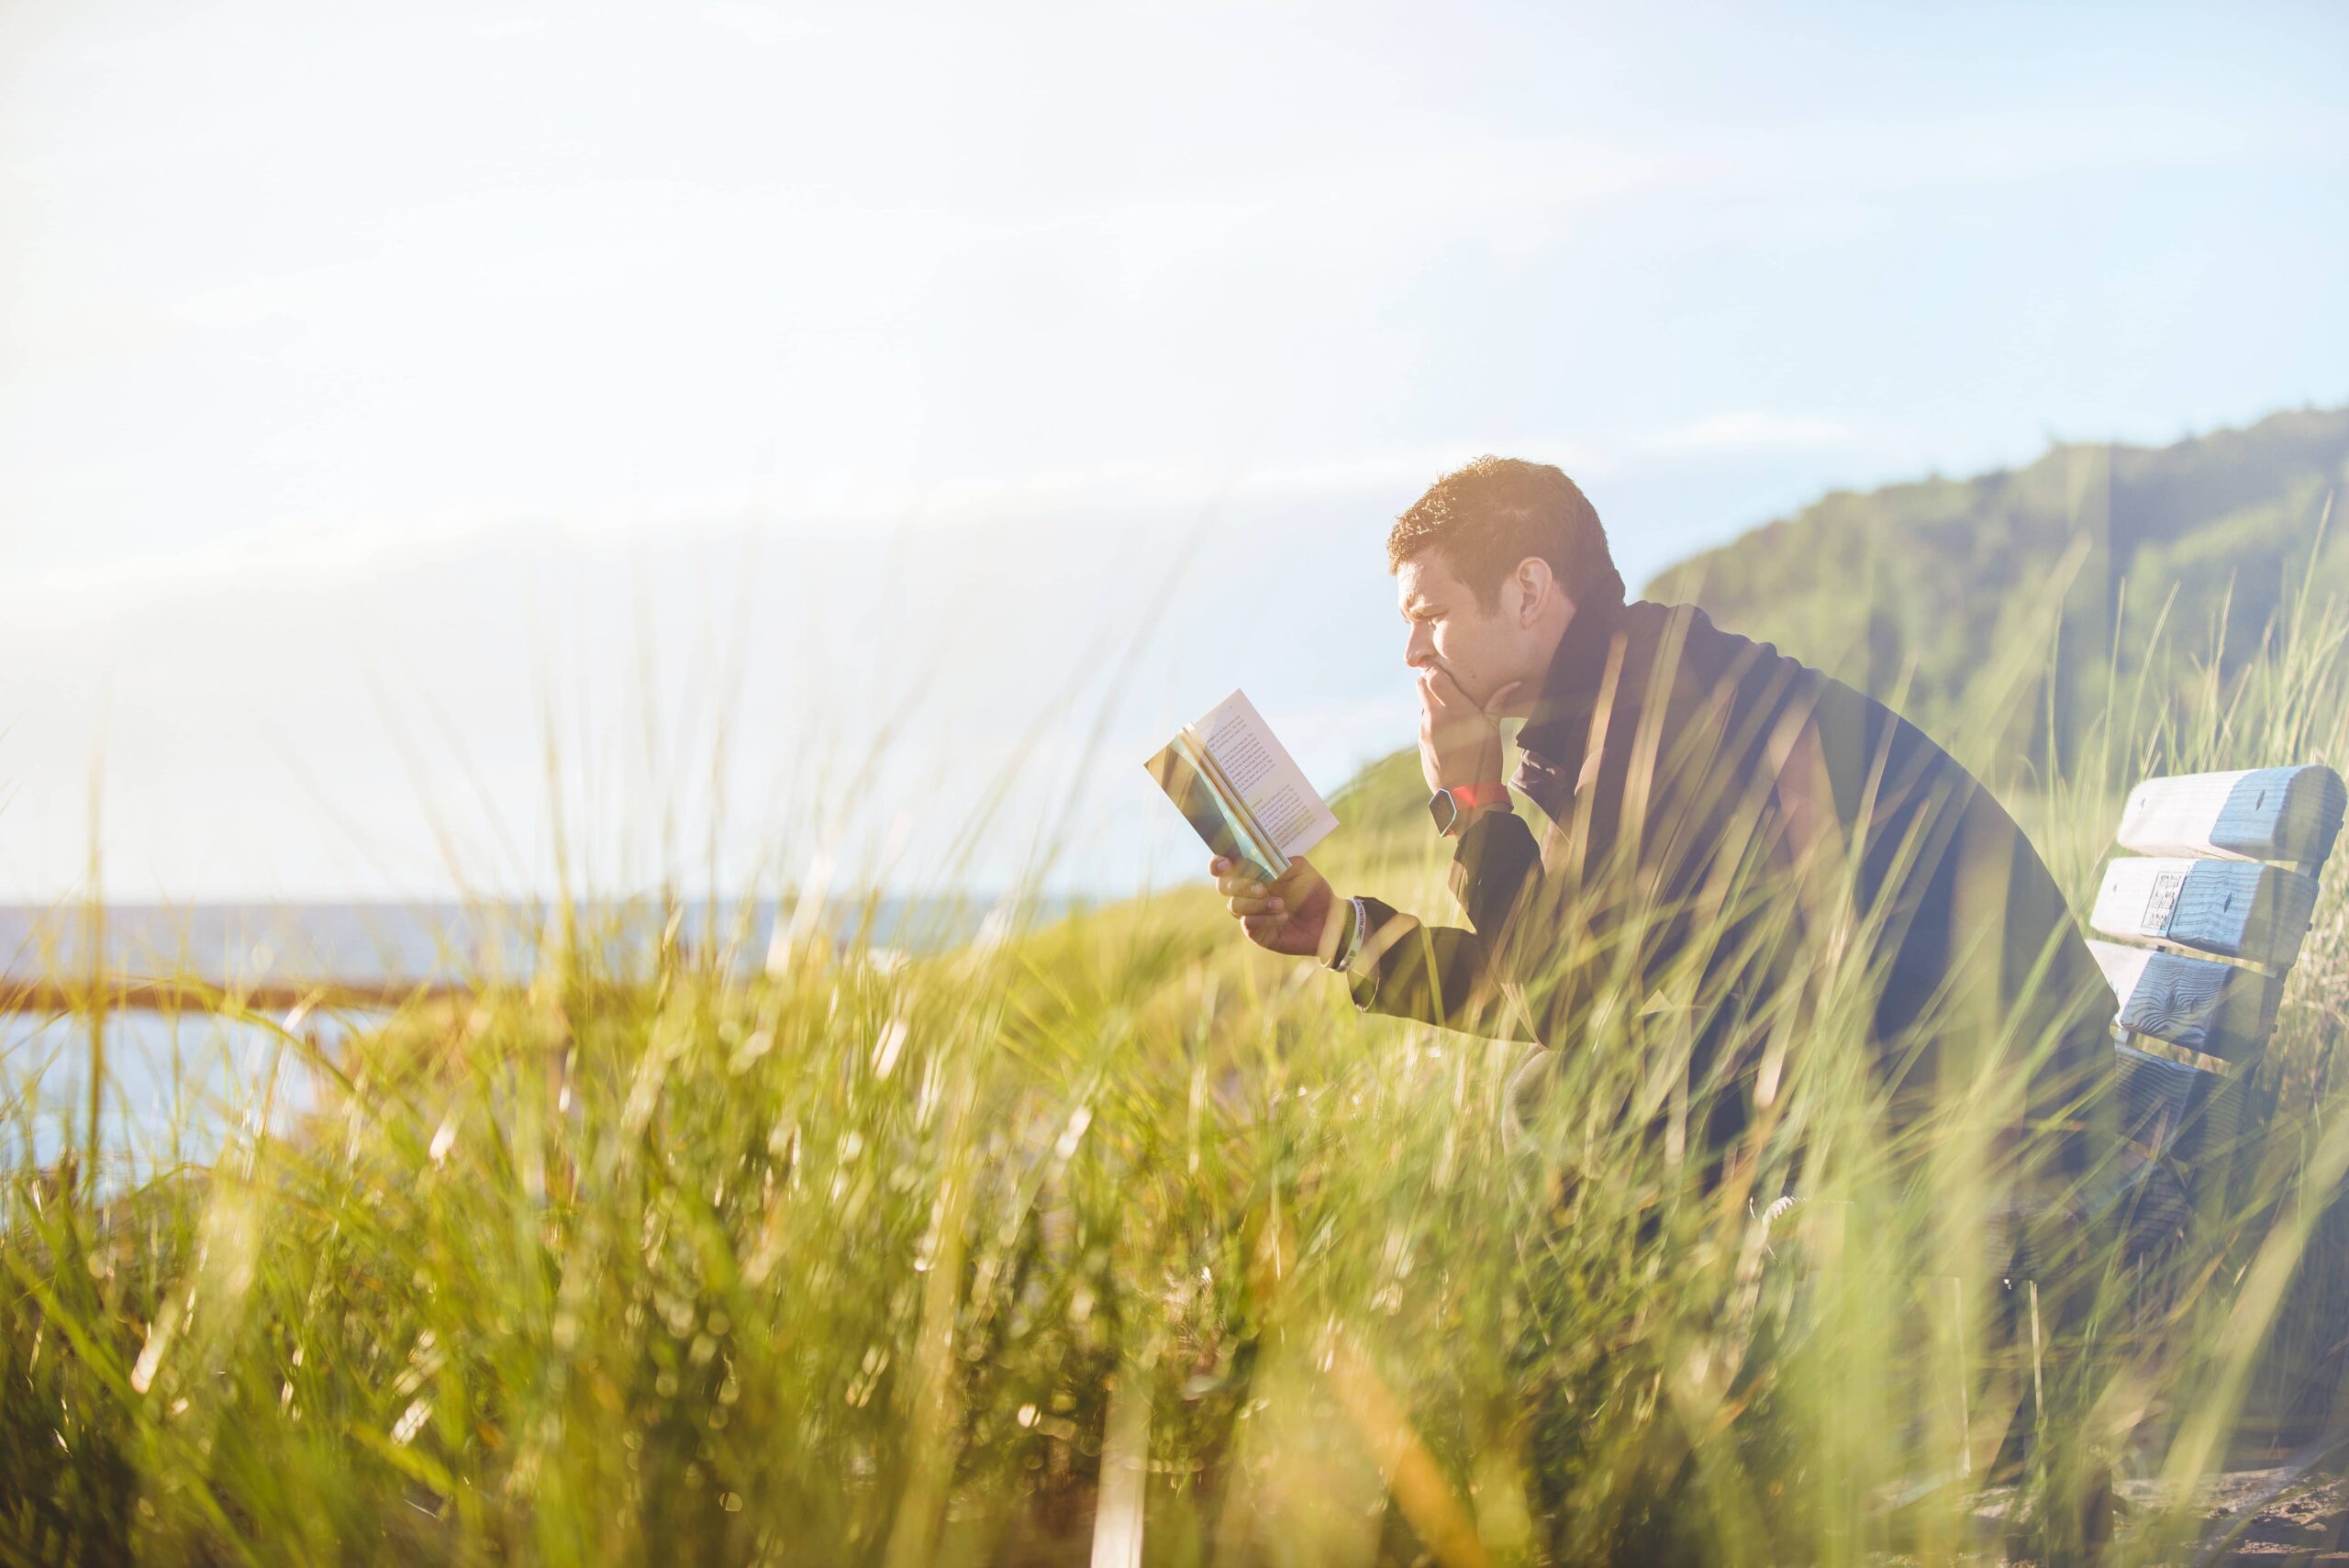 7 Books that Will Inspire You to Adopt a Minimalist Lifestyle